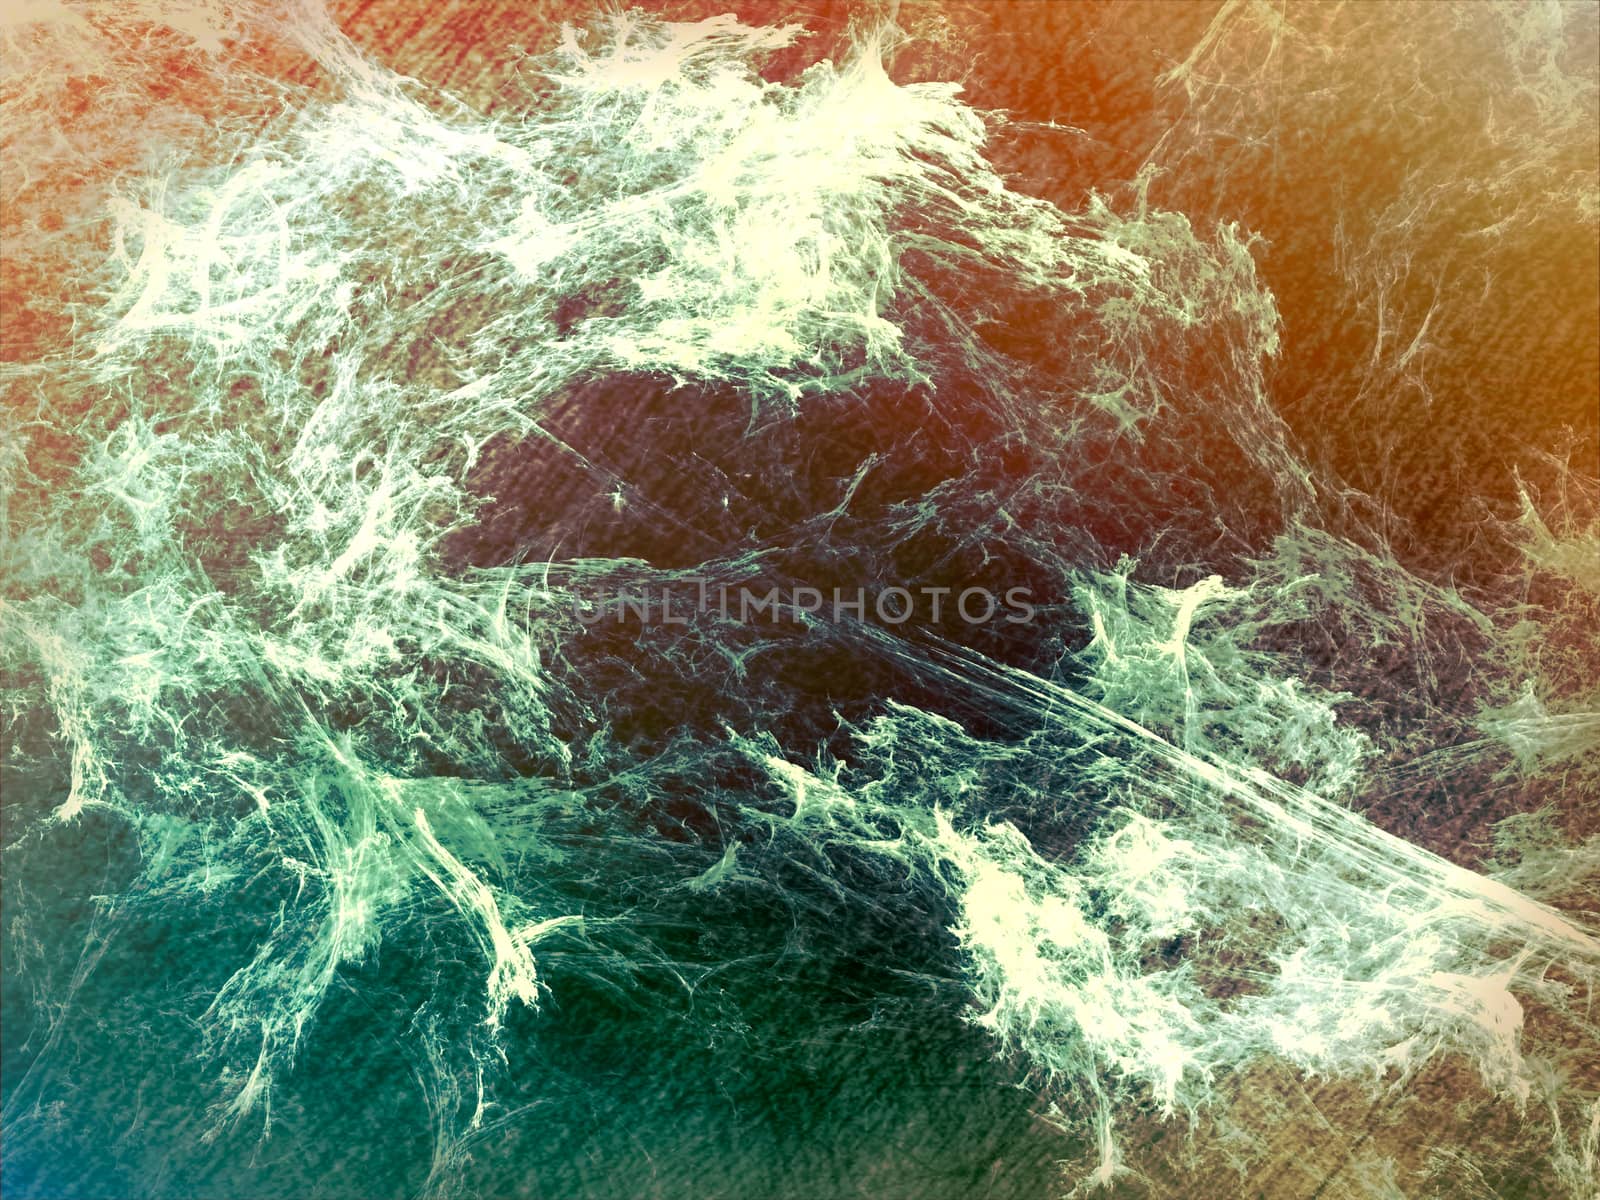 Colourful fractal background - abstract computer-generated image. Digital art: chaos strokes like smoke. Randomly placed lines and curves. For textures, covers, banners.